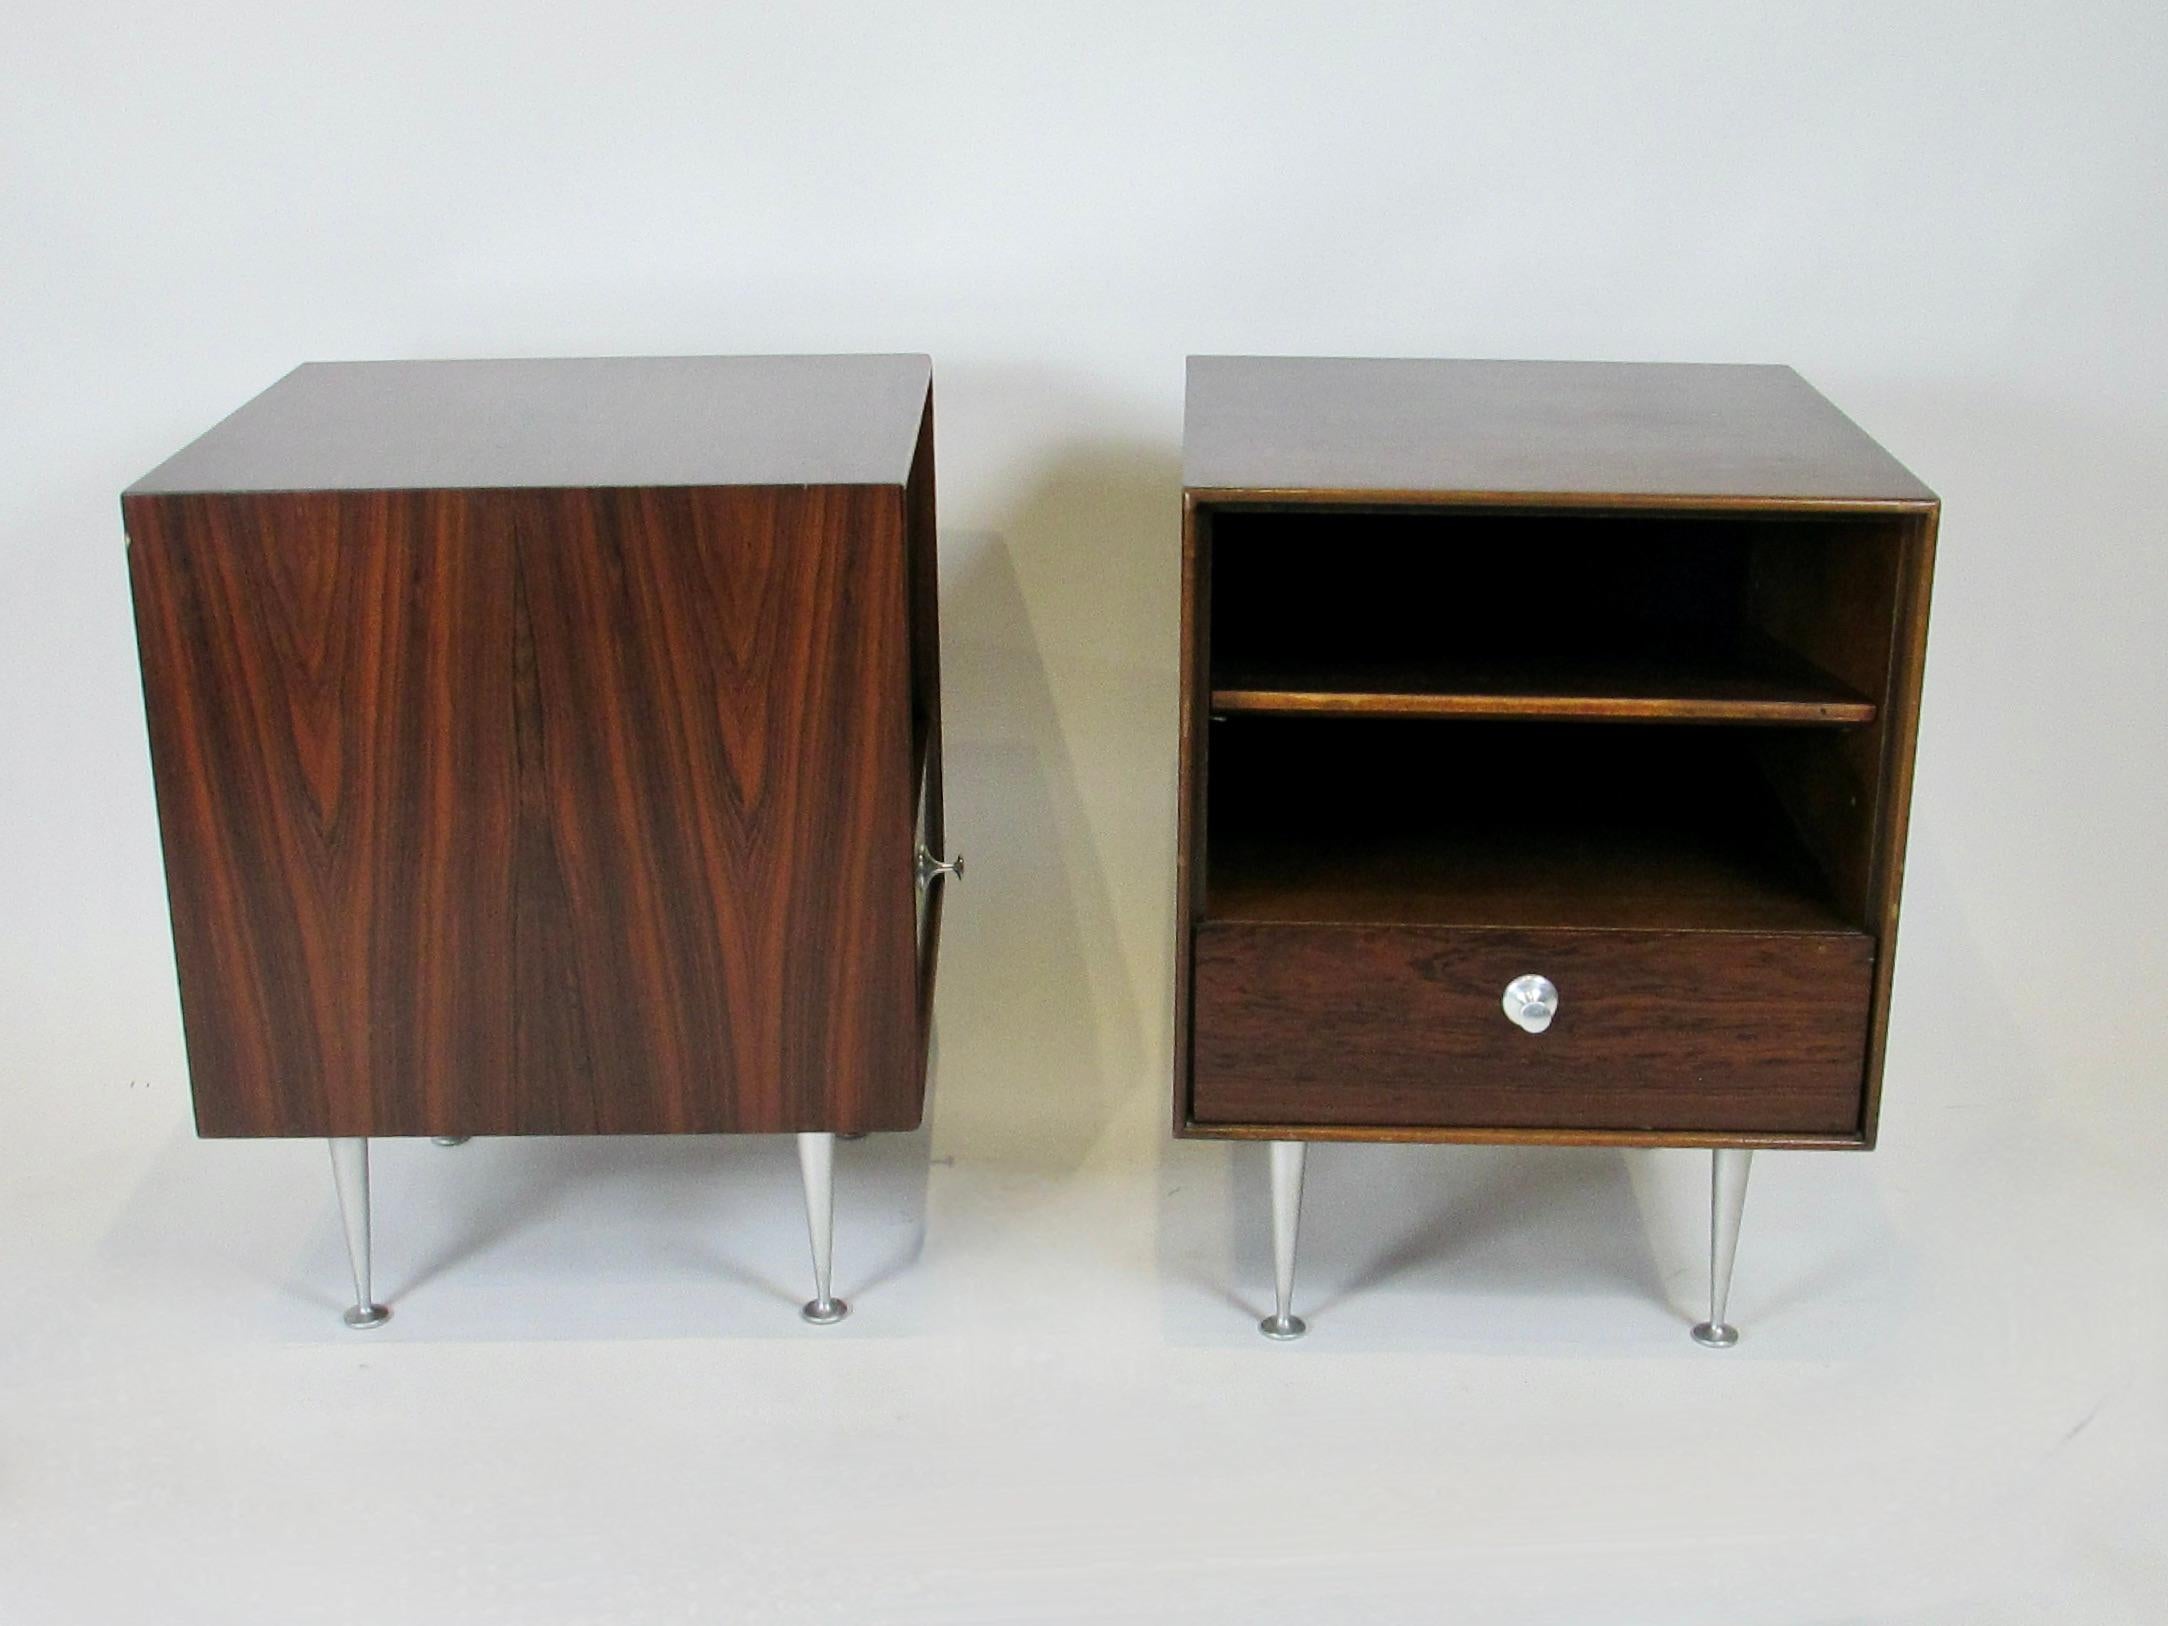 Lacquered Early Pair of George Nelson Herman Miller Nightstands from the Thin Edge Group